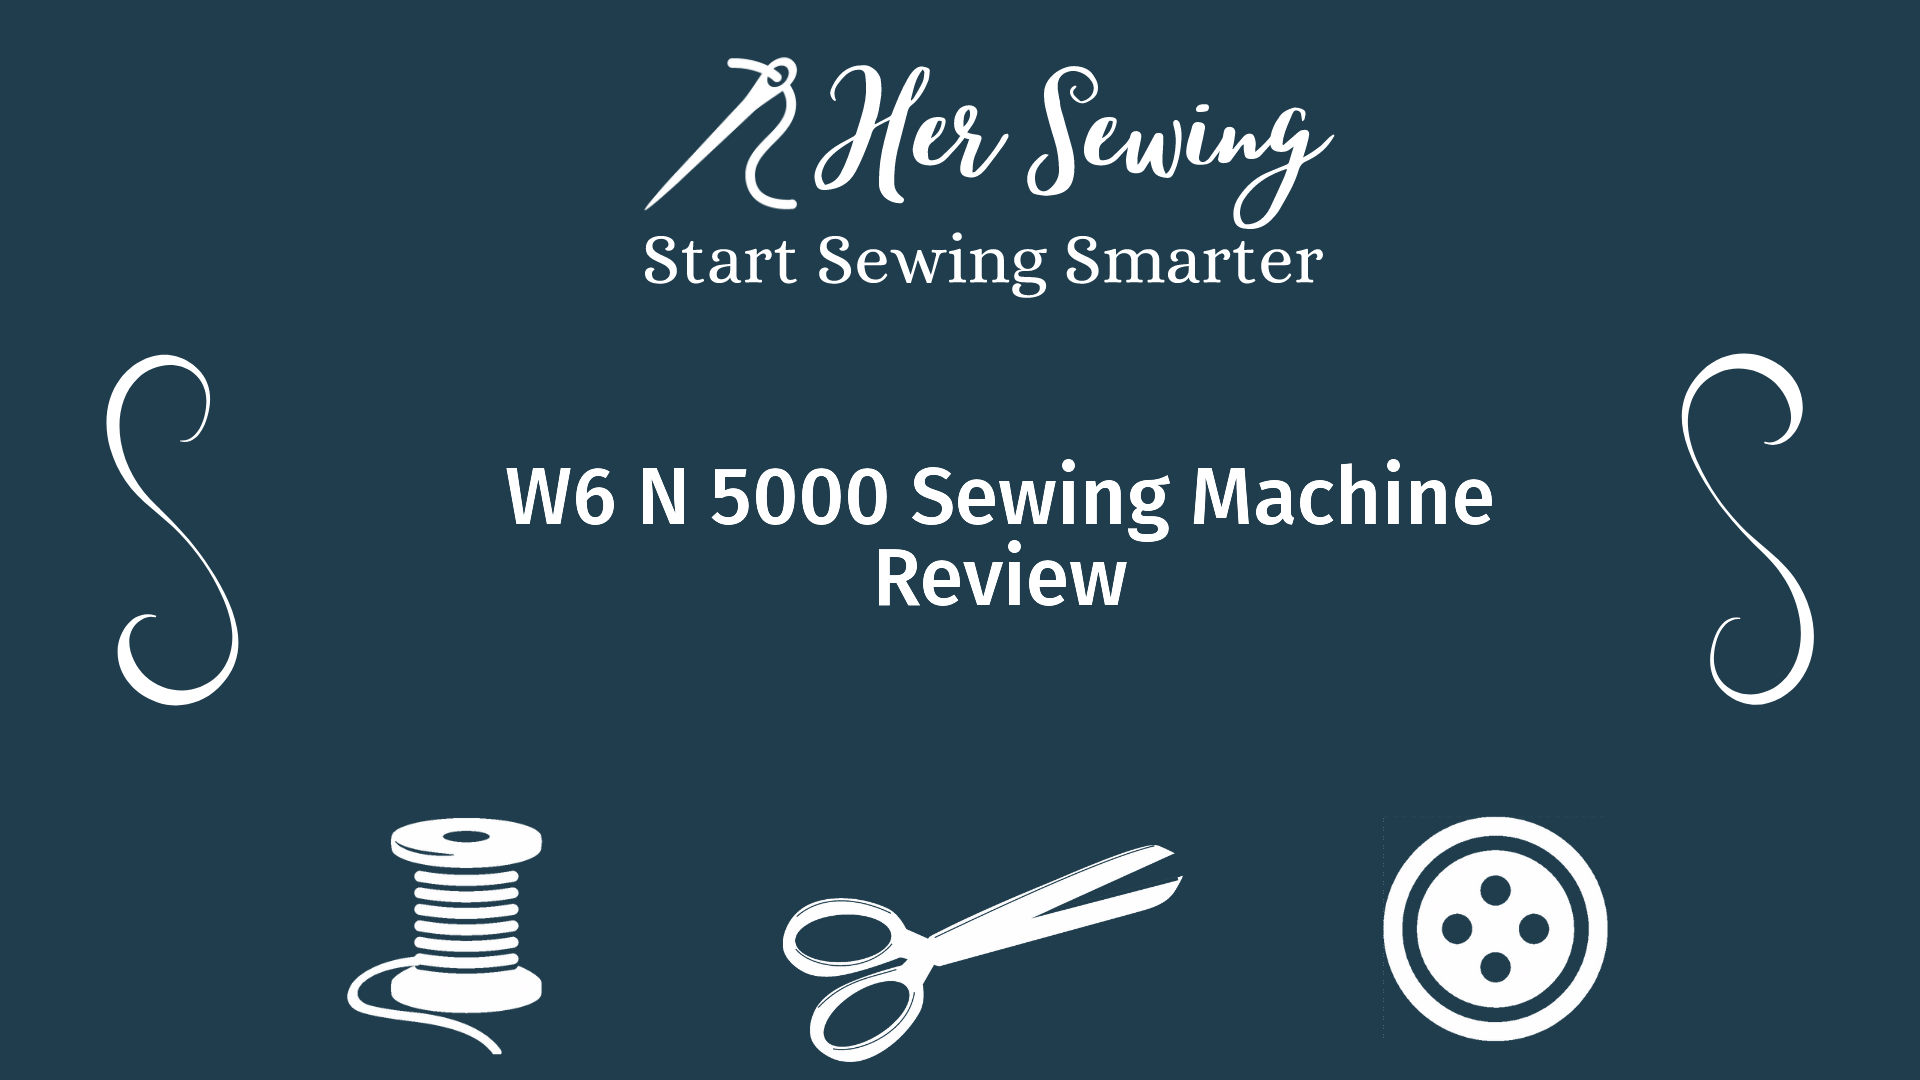 W6 N 5000 Sewing Machine Review